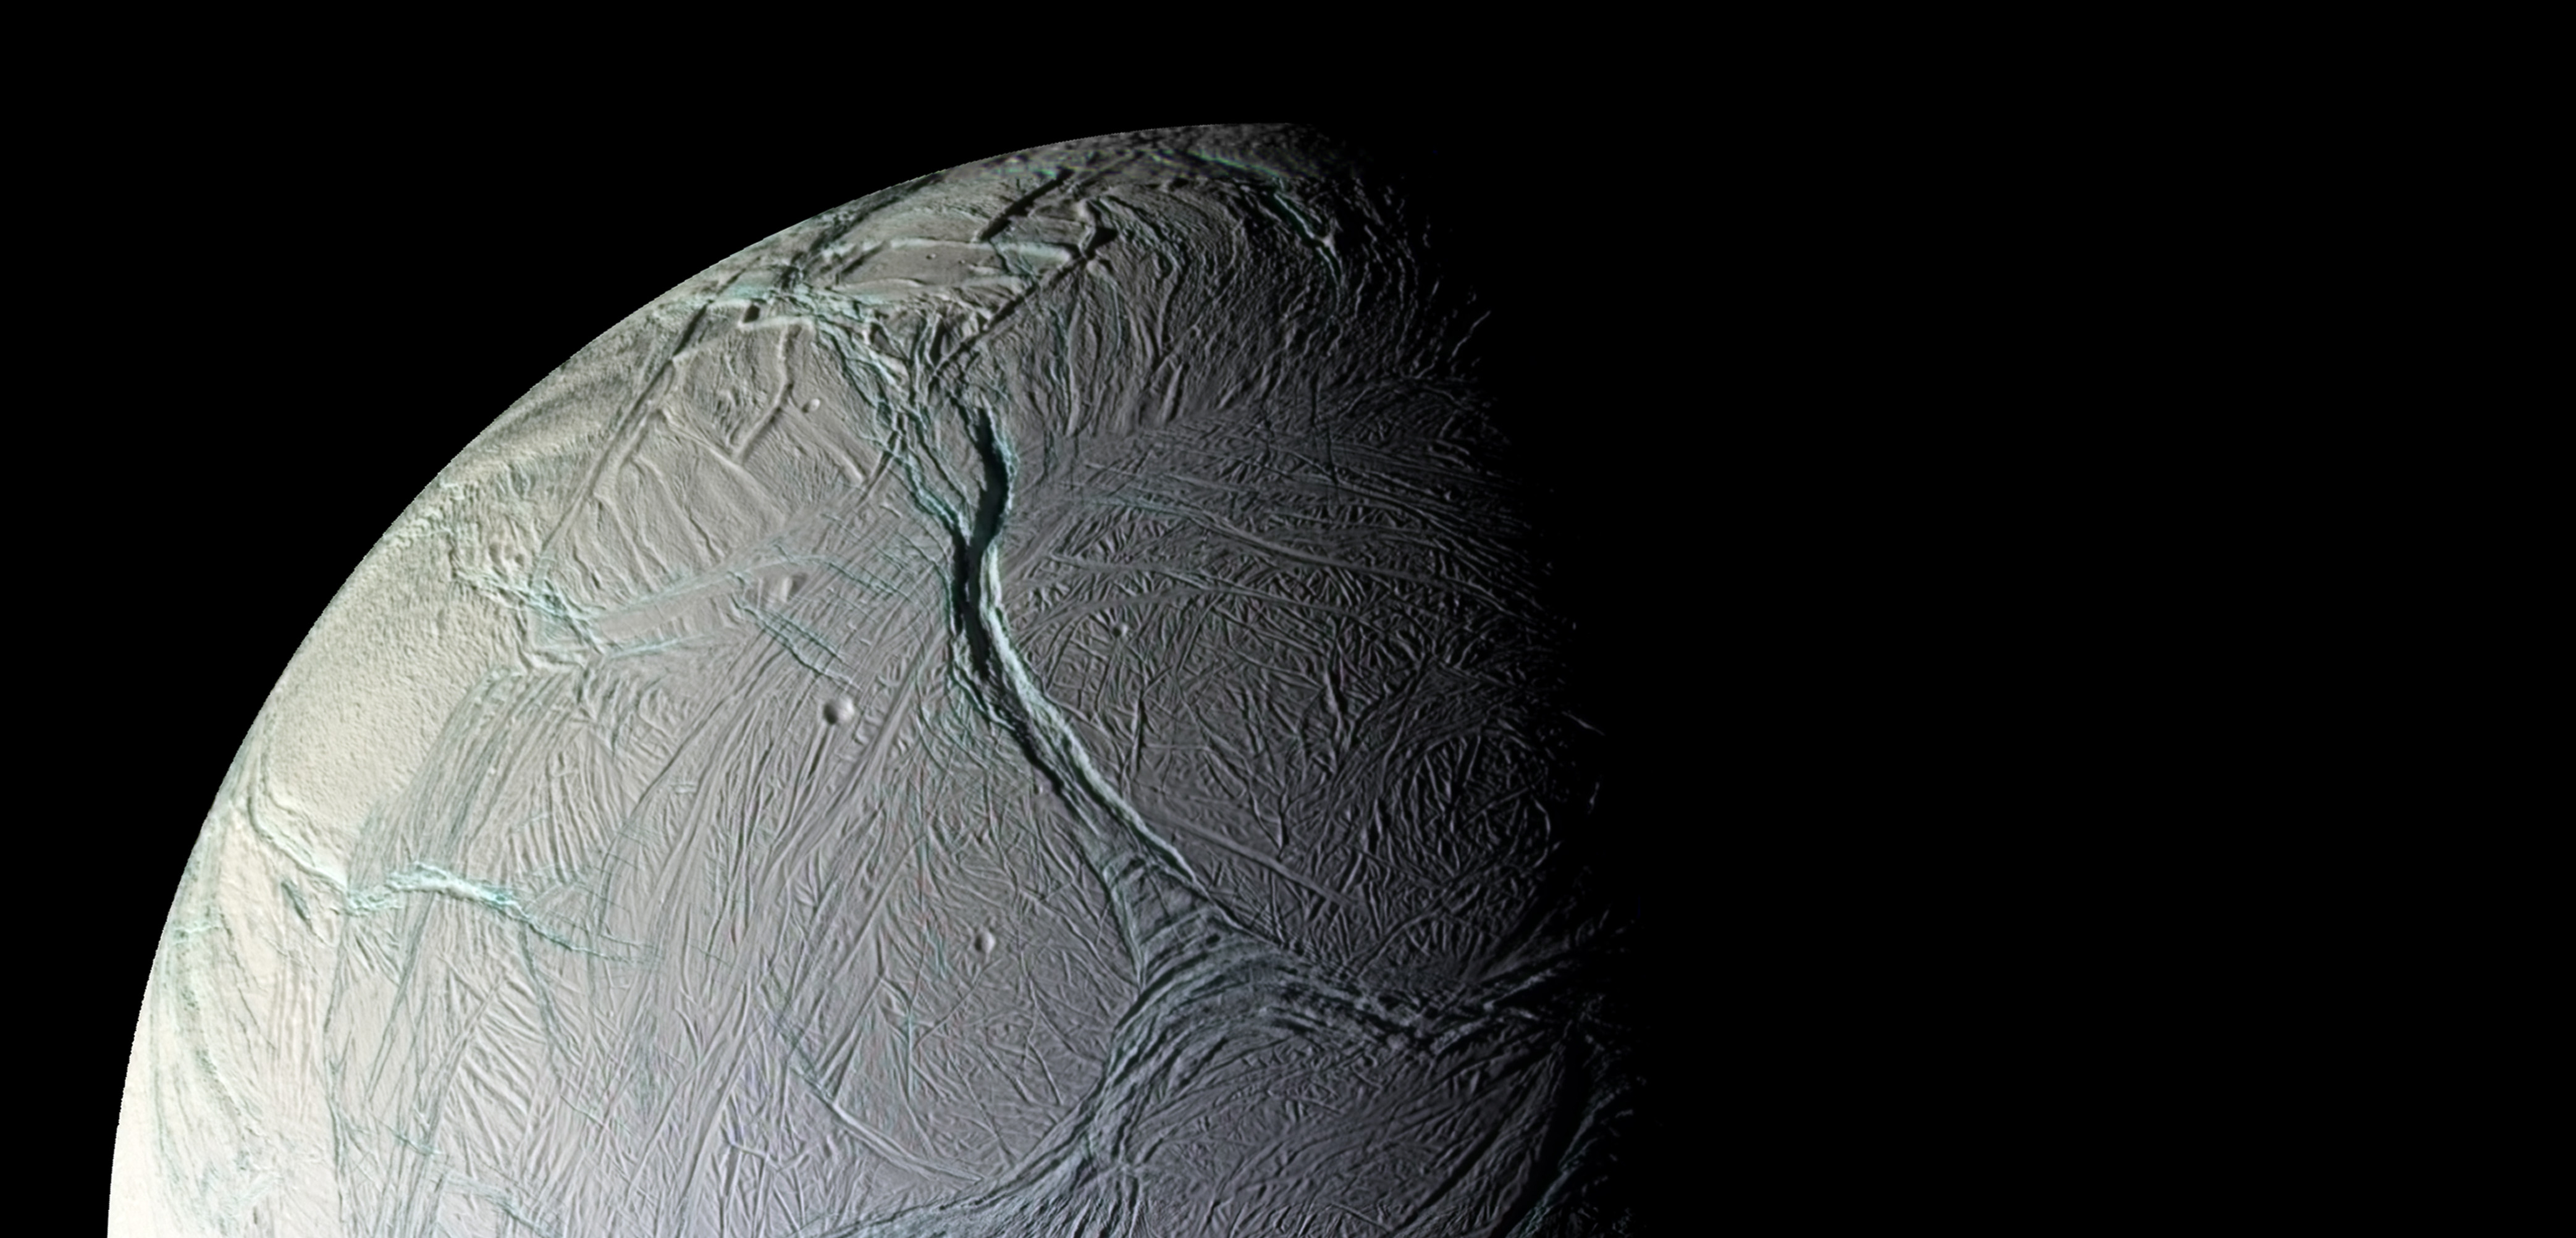 First discovered in 1789, Saturn’s moon Enceladus is still full of secrets. Photo by NASA/JPL-Caltech/Corbis